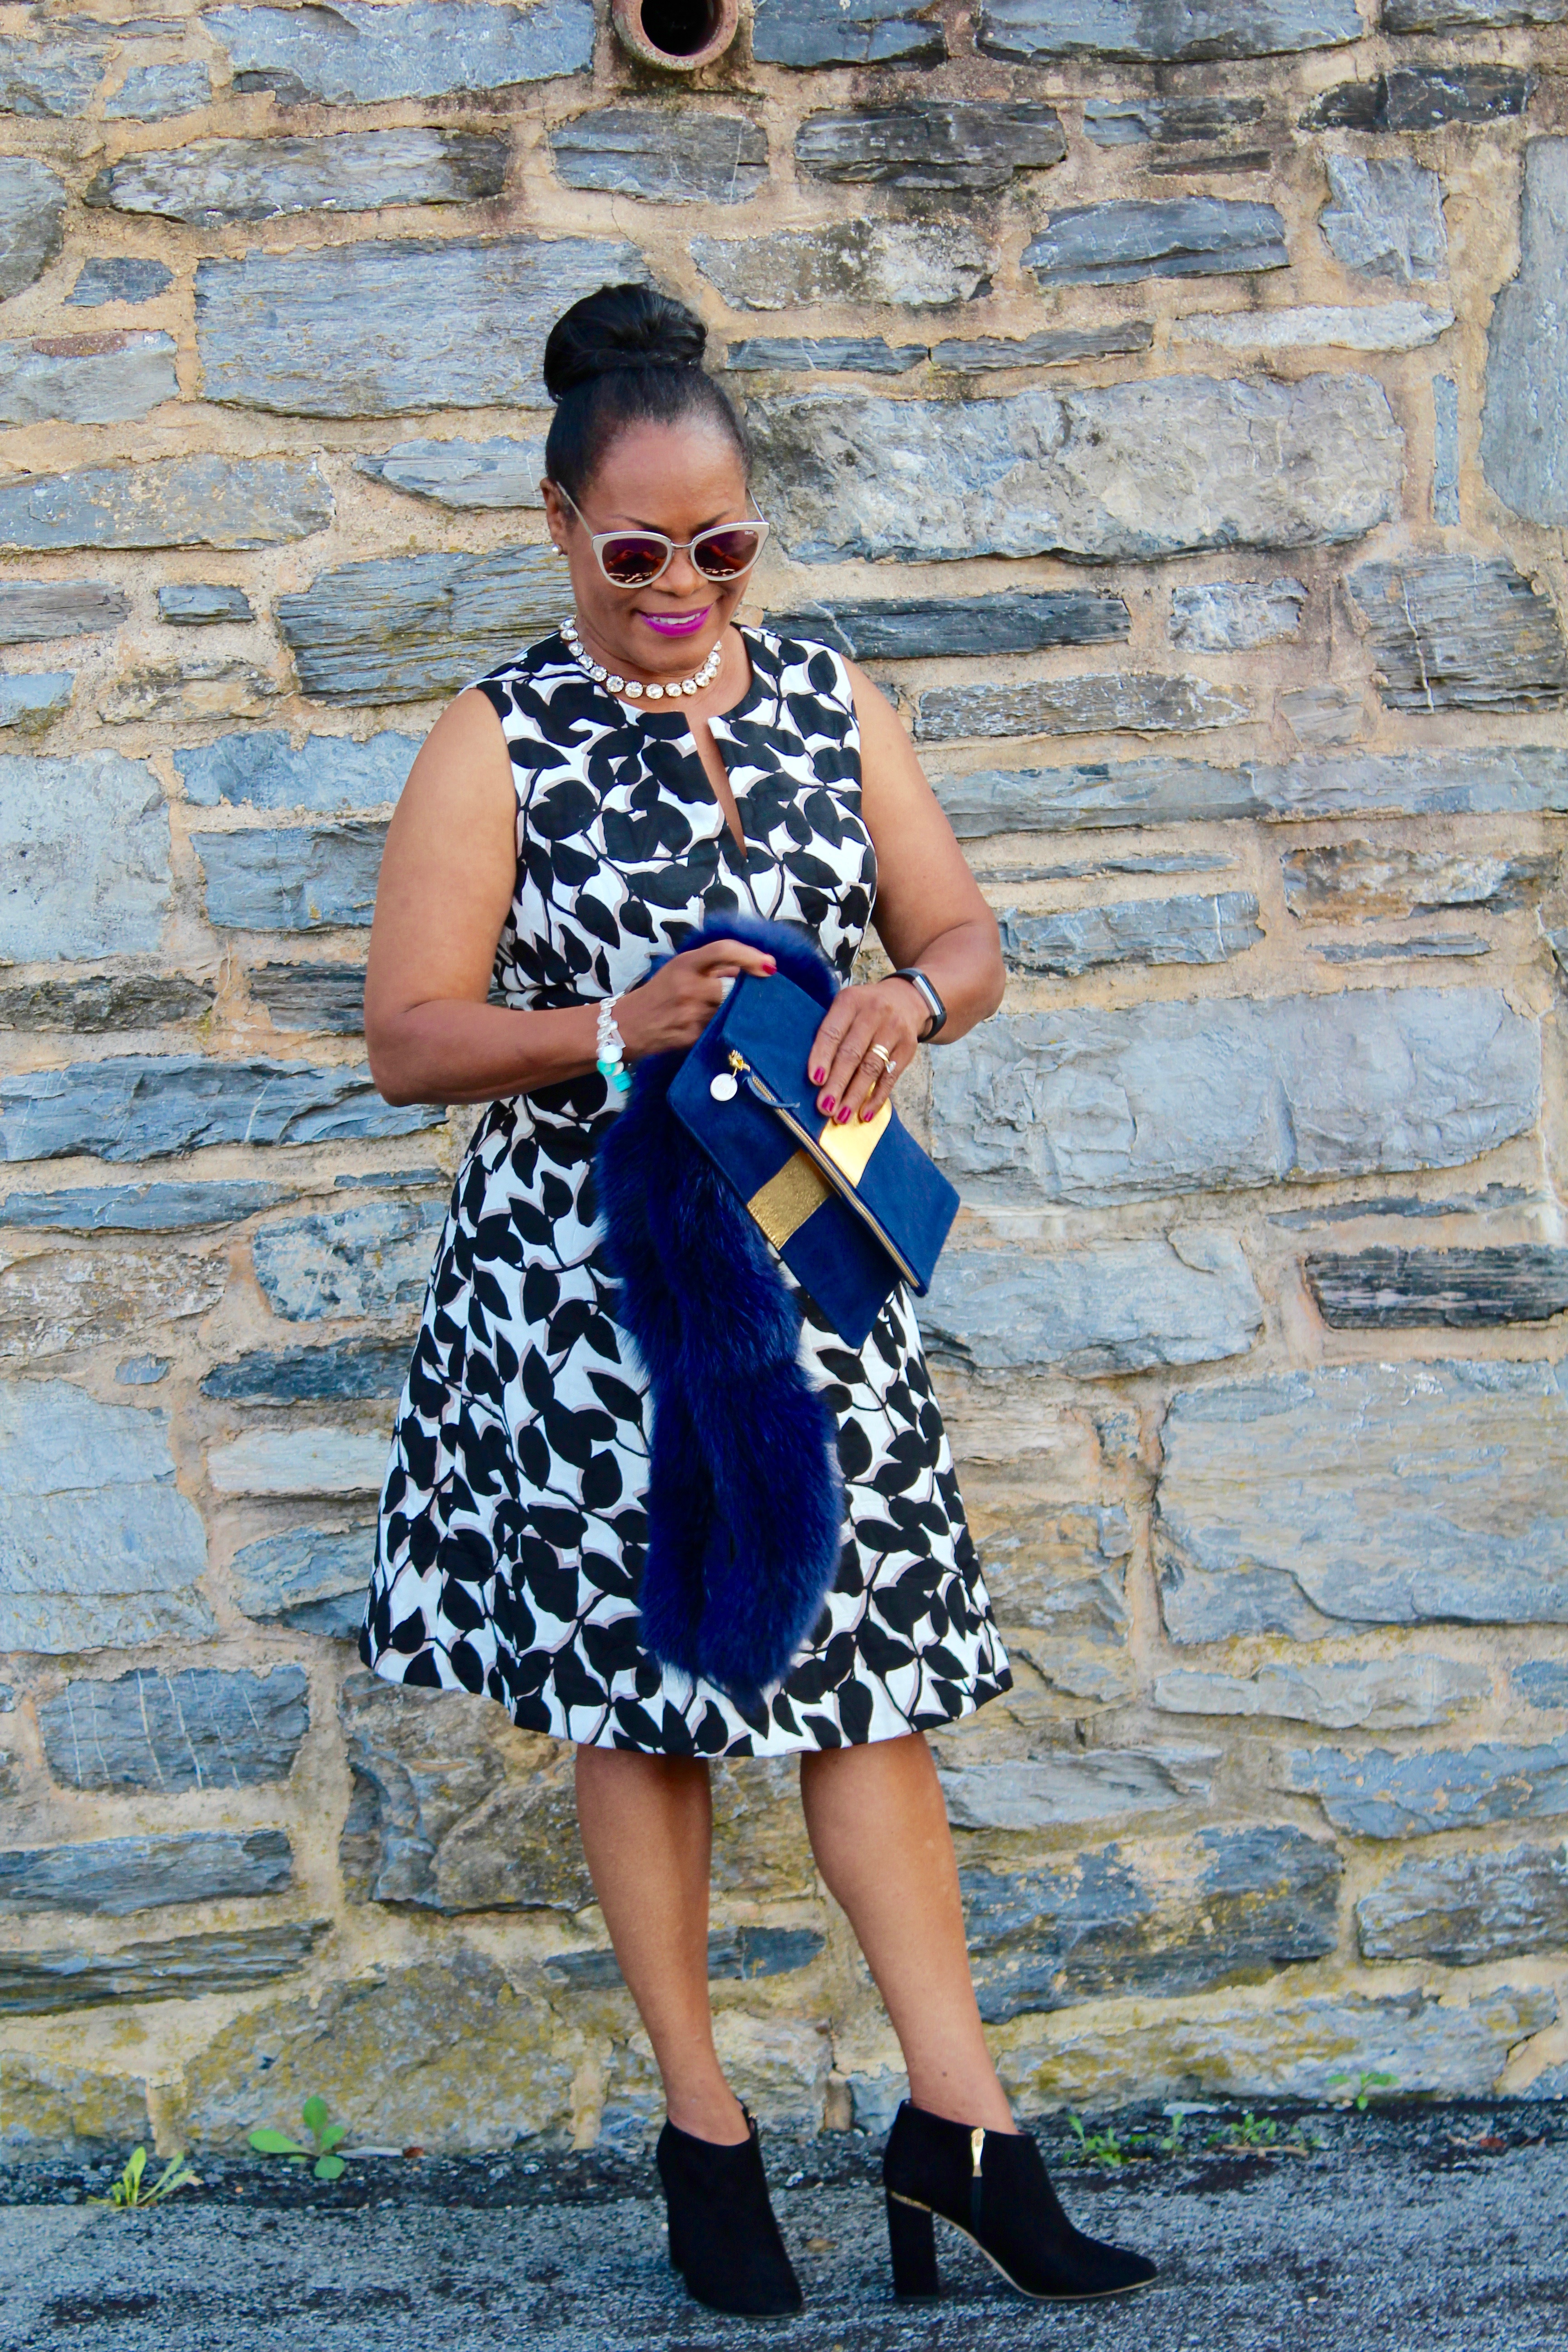 Wearing: Kate Spade Garden Leaves A-Line Black and White Cotton Dress, Doncaster Blue Faux Fur, Clare V Vogue VIP Collaboration Clutch, Kate Spade Darota Suede Booties and ASOS Quay Australia Aviator Cat Eye Sunnies.